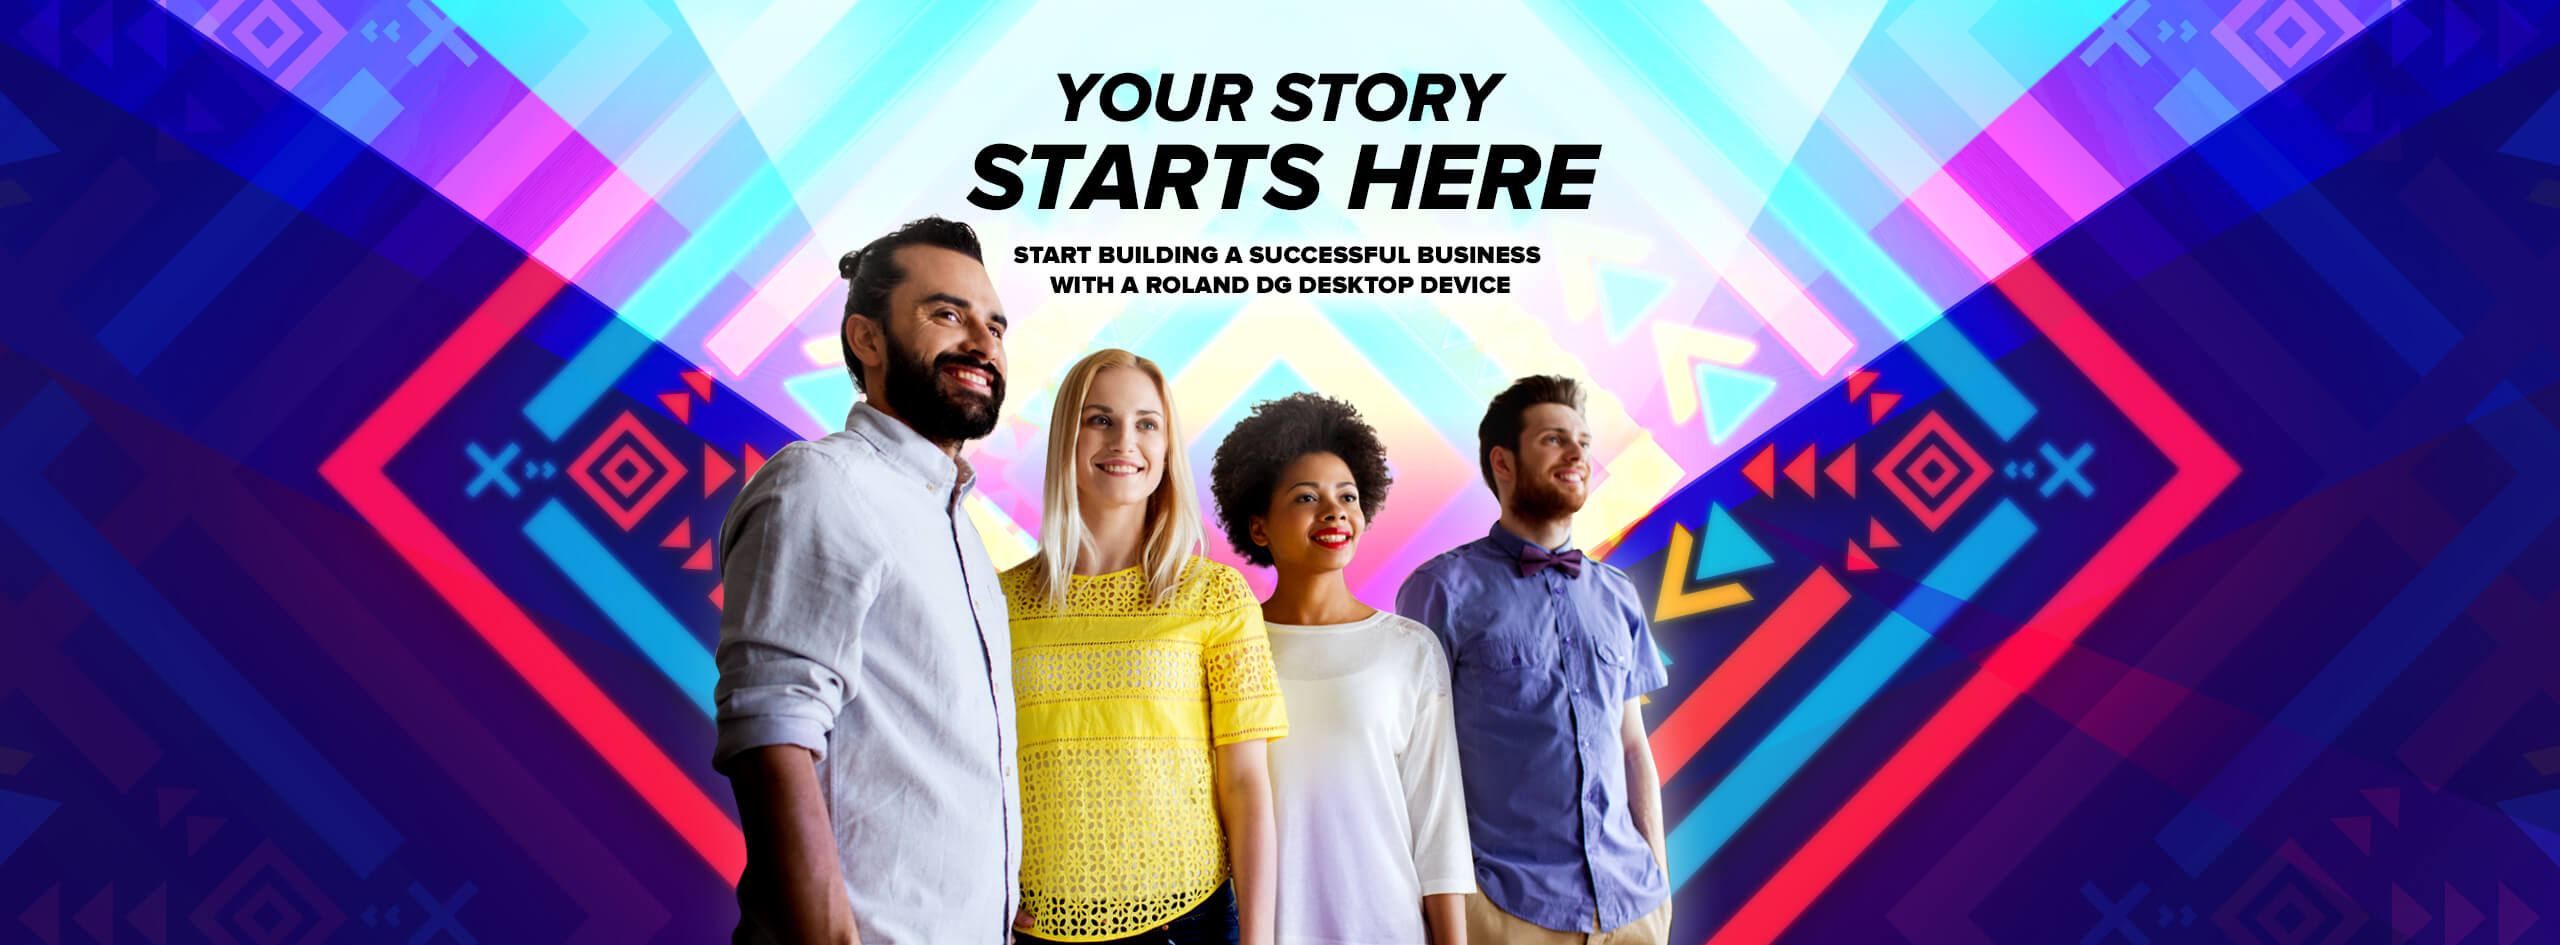 Your Story Starts Here Banner